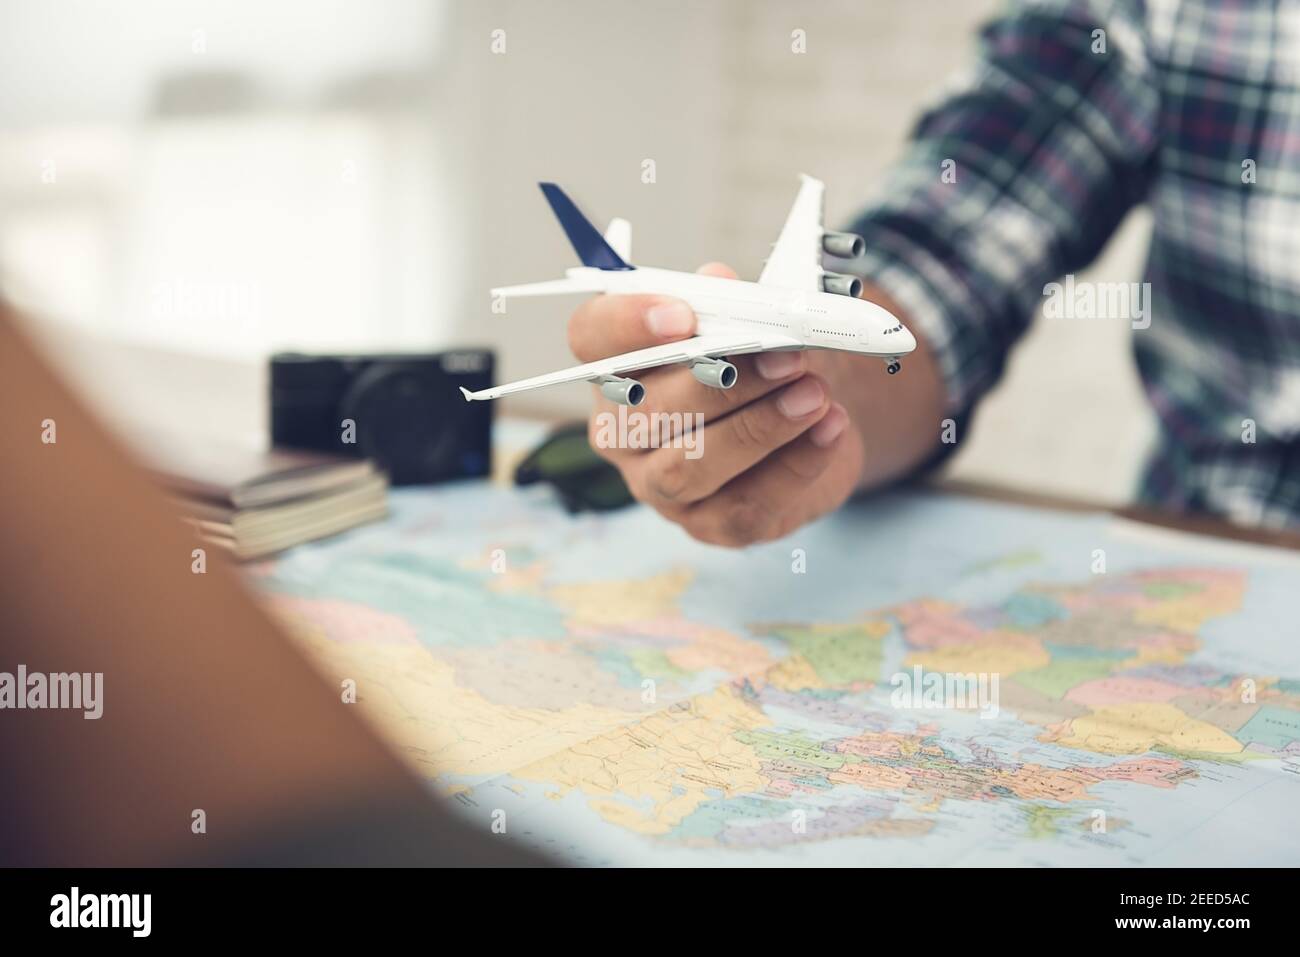 A man holding a plane model over a world map while planning holiday travel aboard for him and his partner to their dream destinations Stock Photo